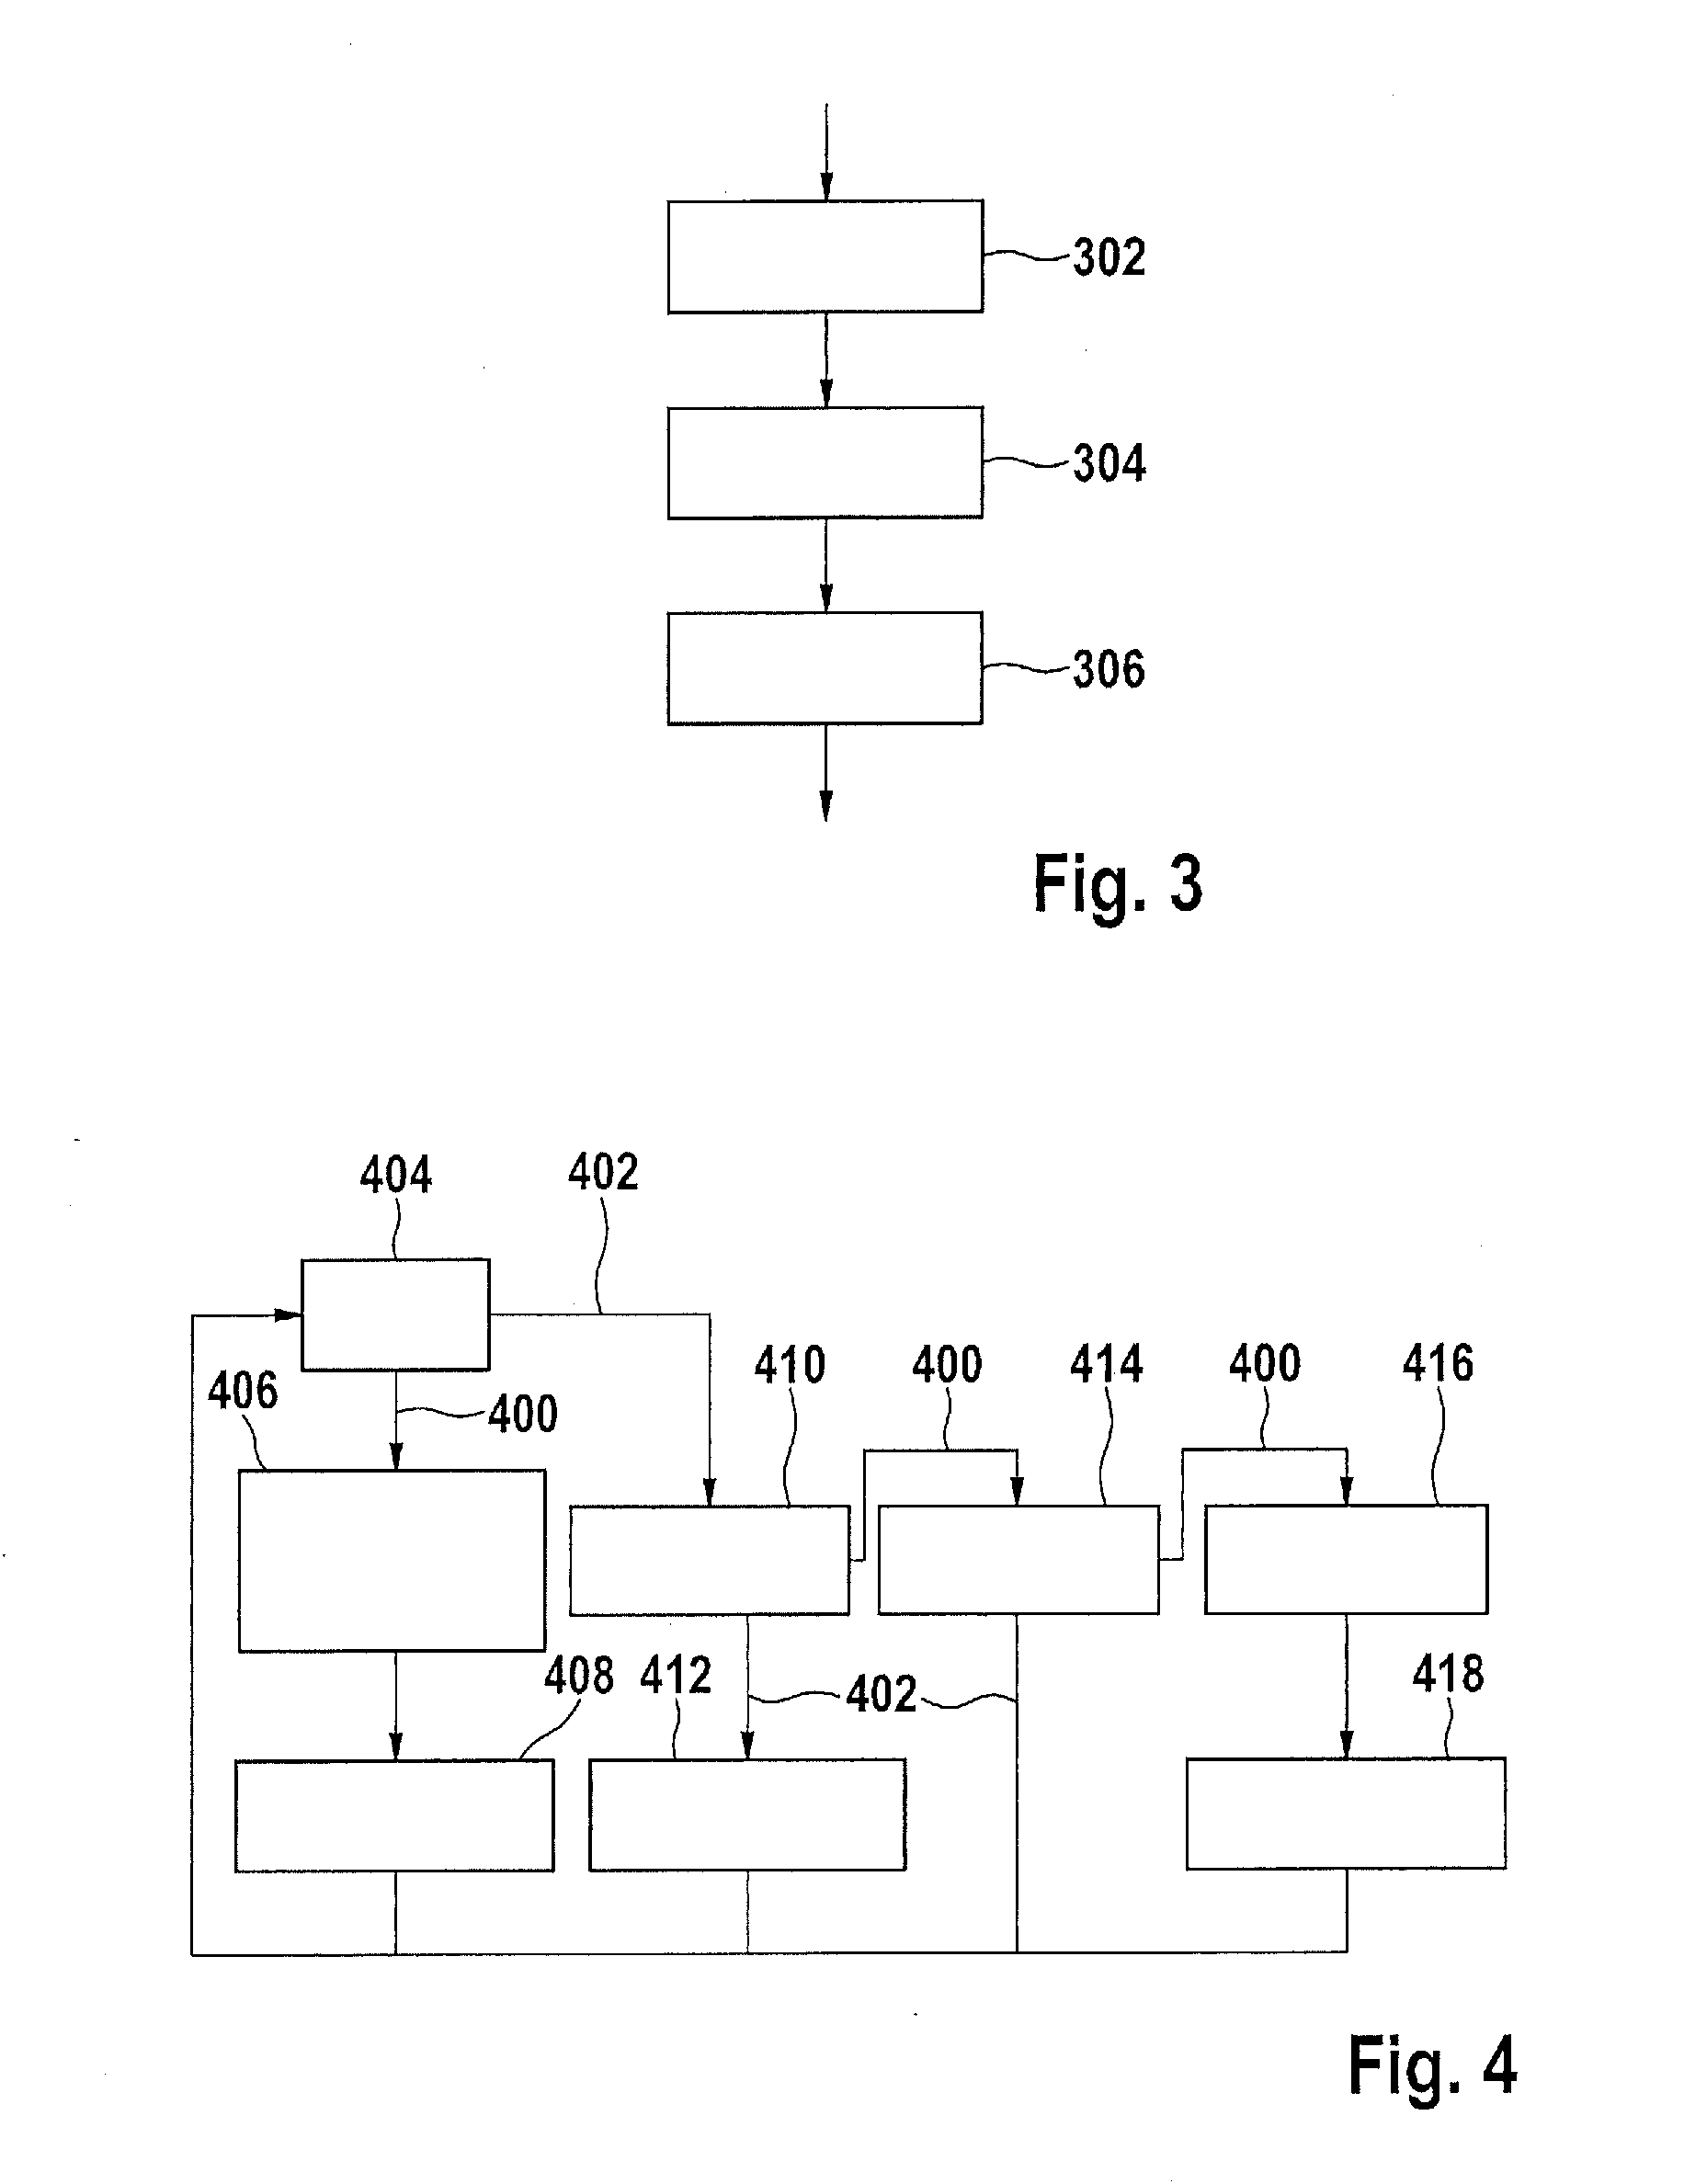 Method and control device for switching on the high beam headlights of a vehicle